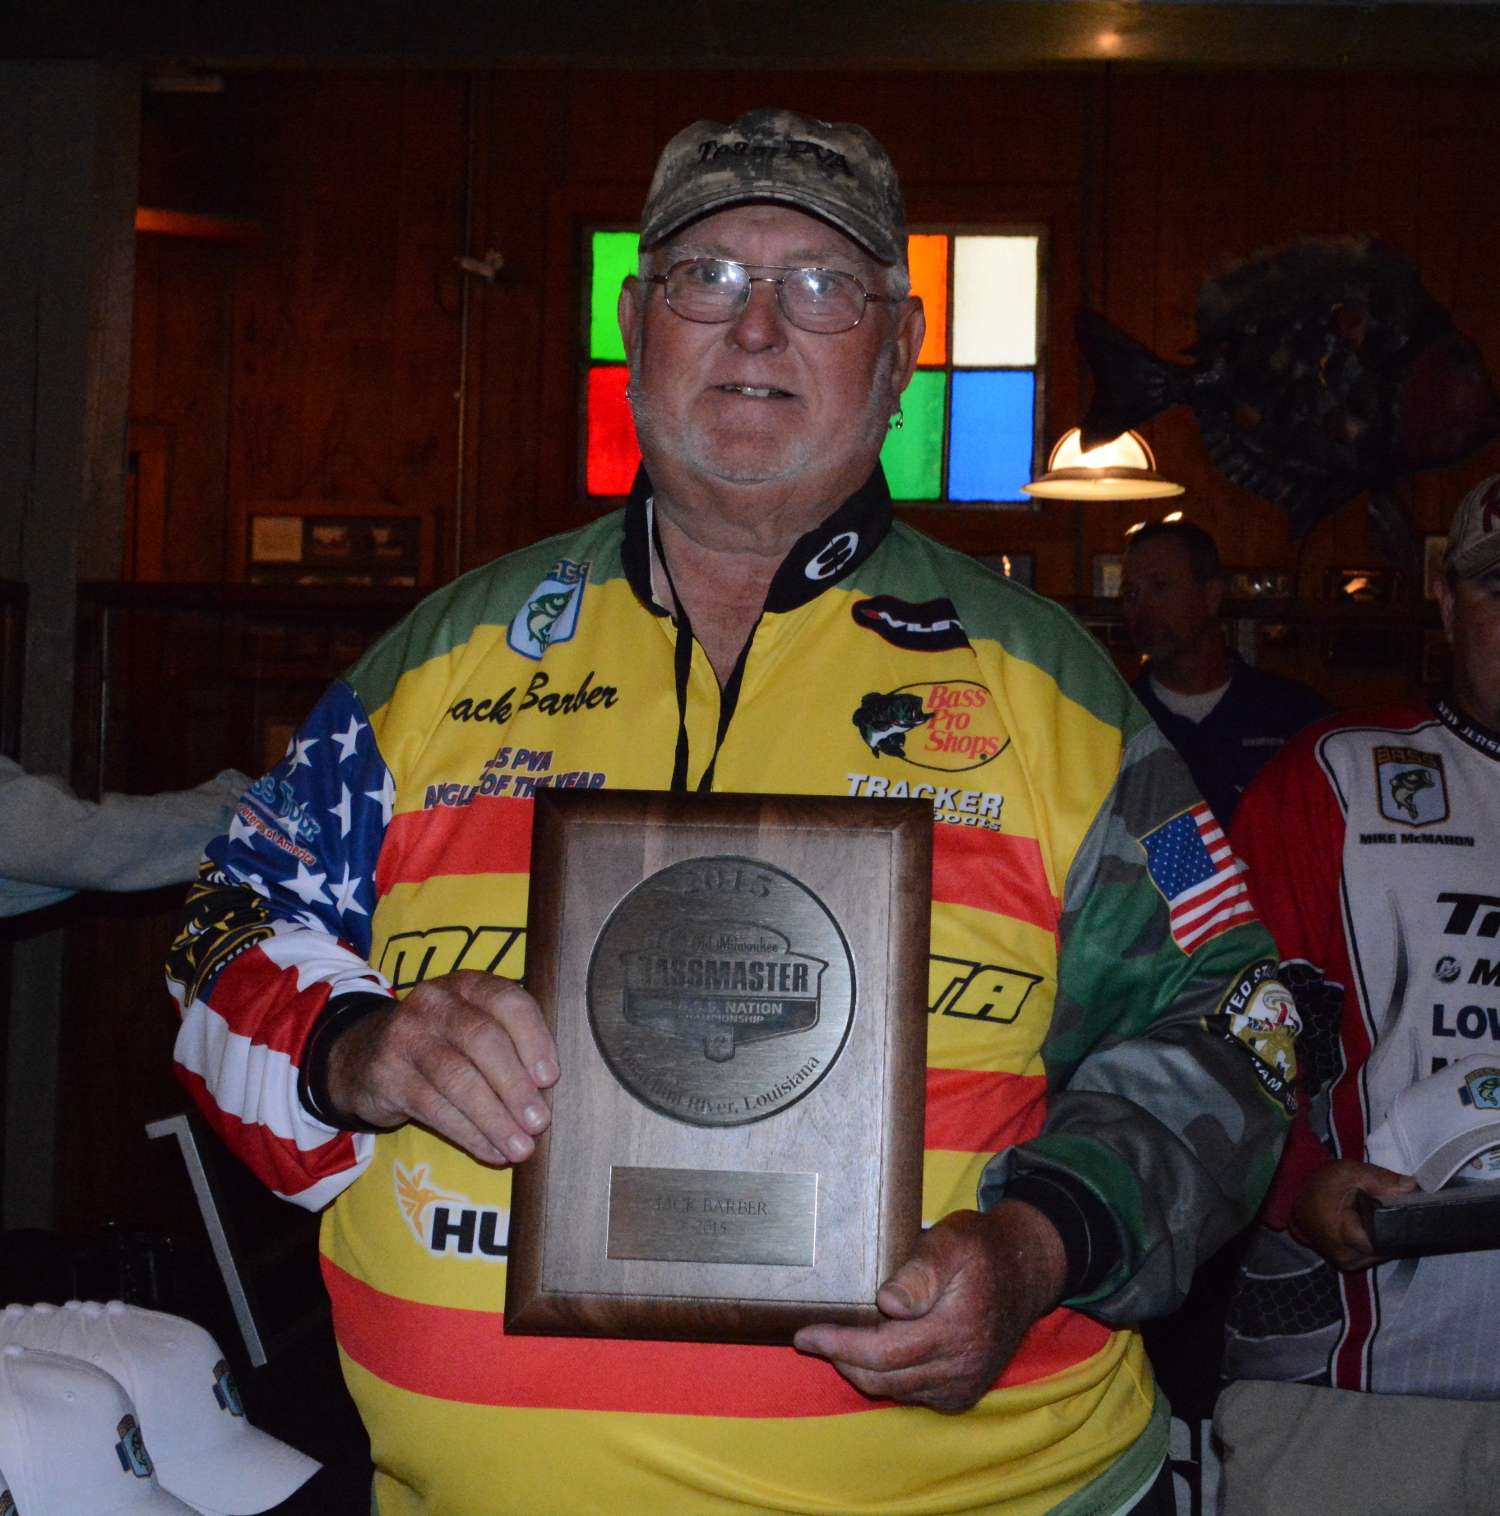 Jack Barber of Texas shows off another of the gifts, which is the plaque every competitor receives for qualifying. Barber qualified through the Paralyzed Veterans of America Tour, and he's proud to be sporting a jersey that displays the colors of Vietnam veterans.